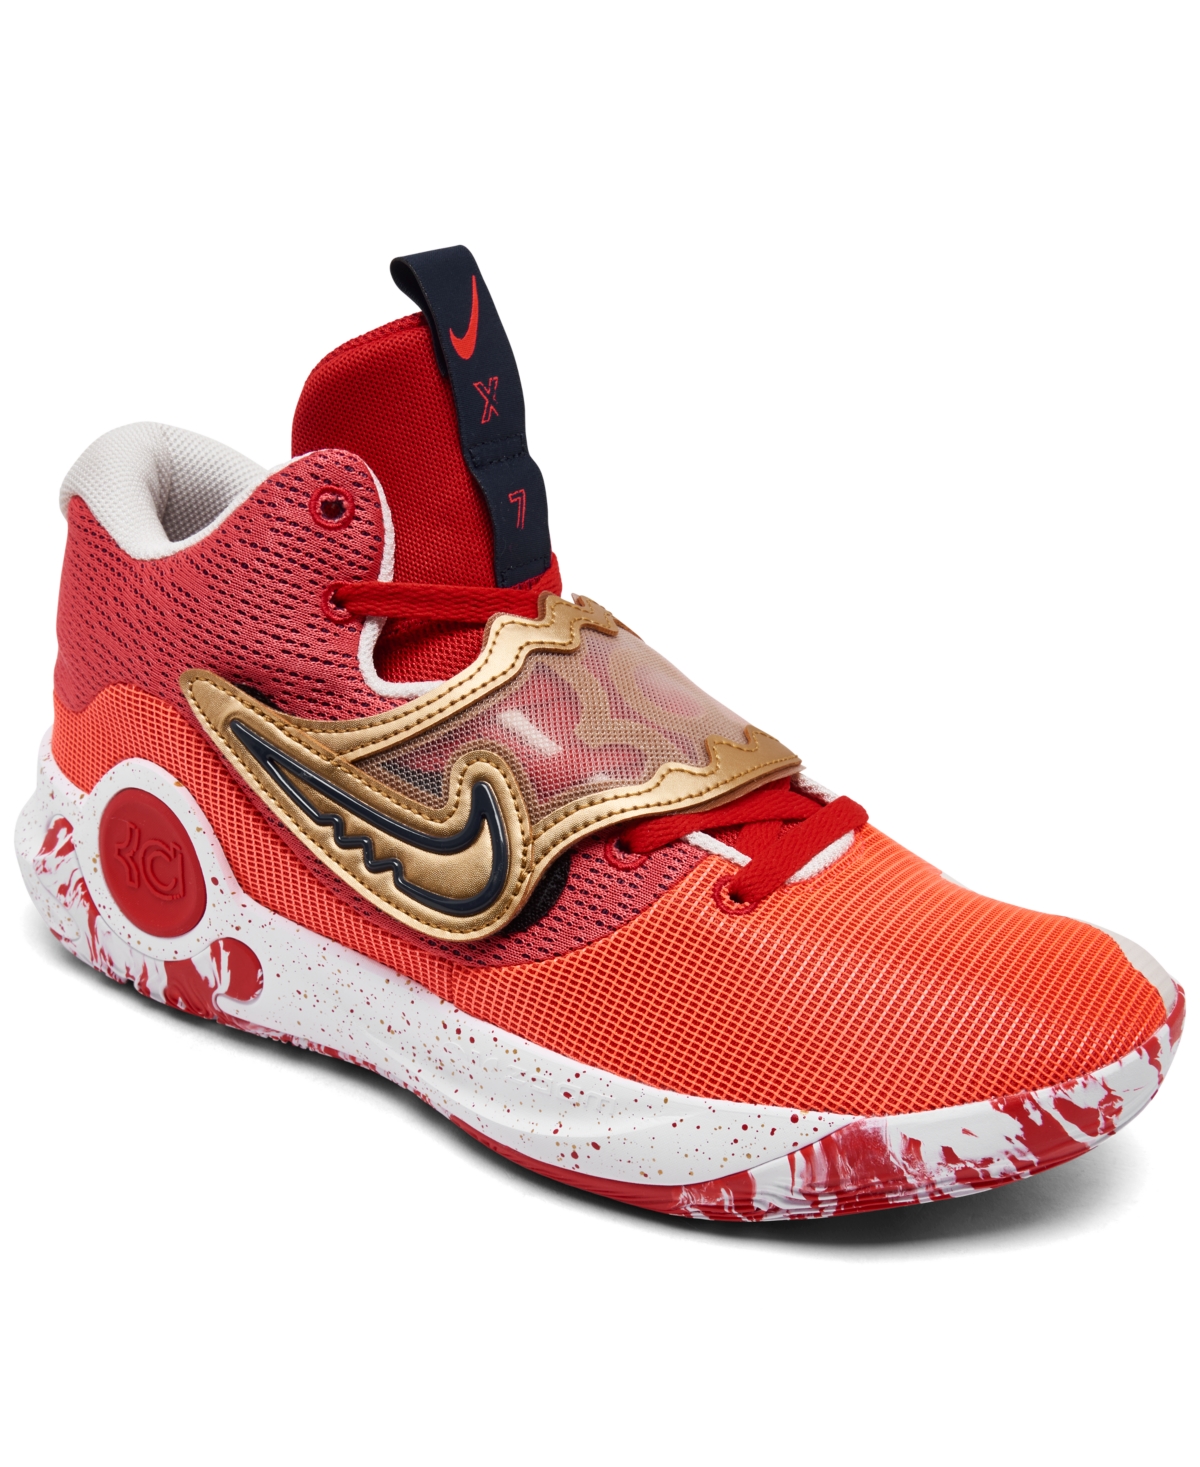 NIKE MEN'S KD TREY 5 X BASKETBALL SNEAKERS FROM FINISH LINE